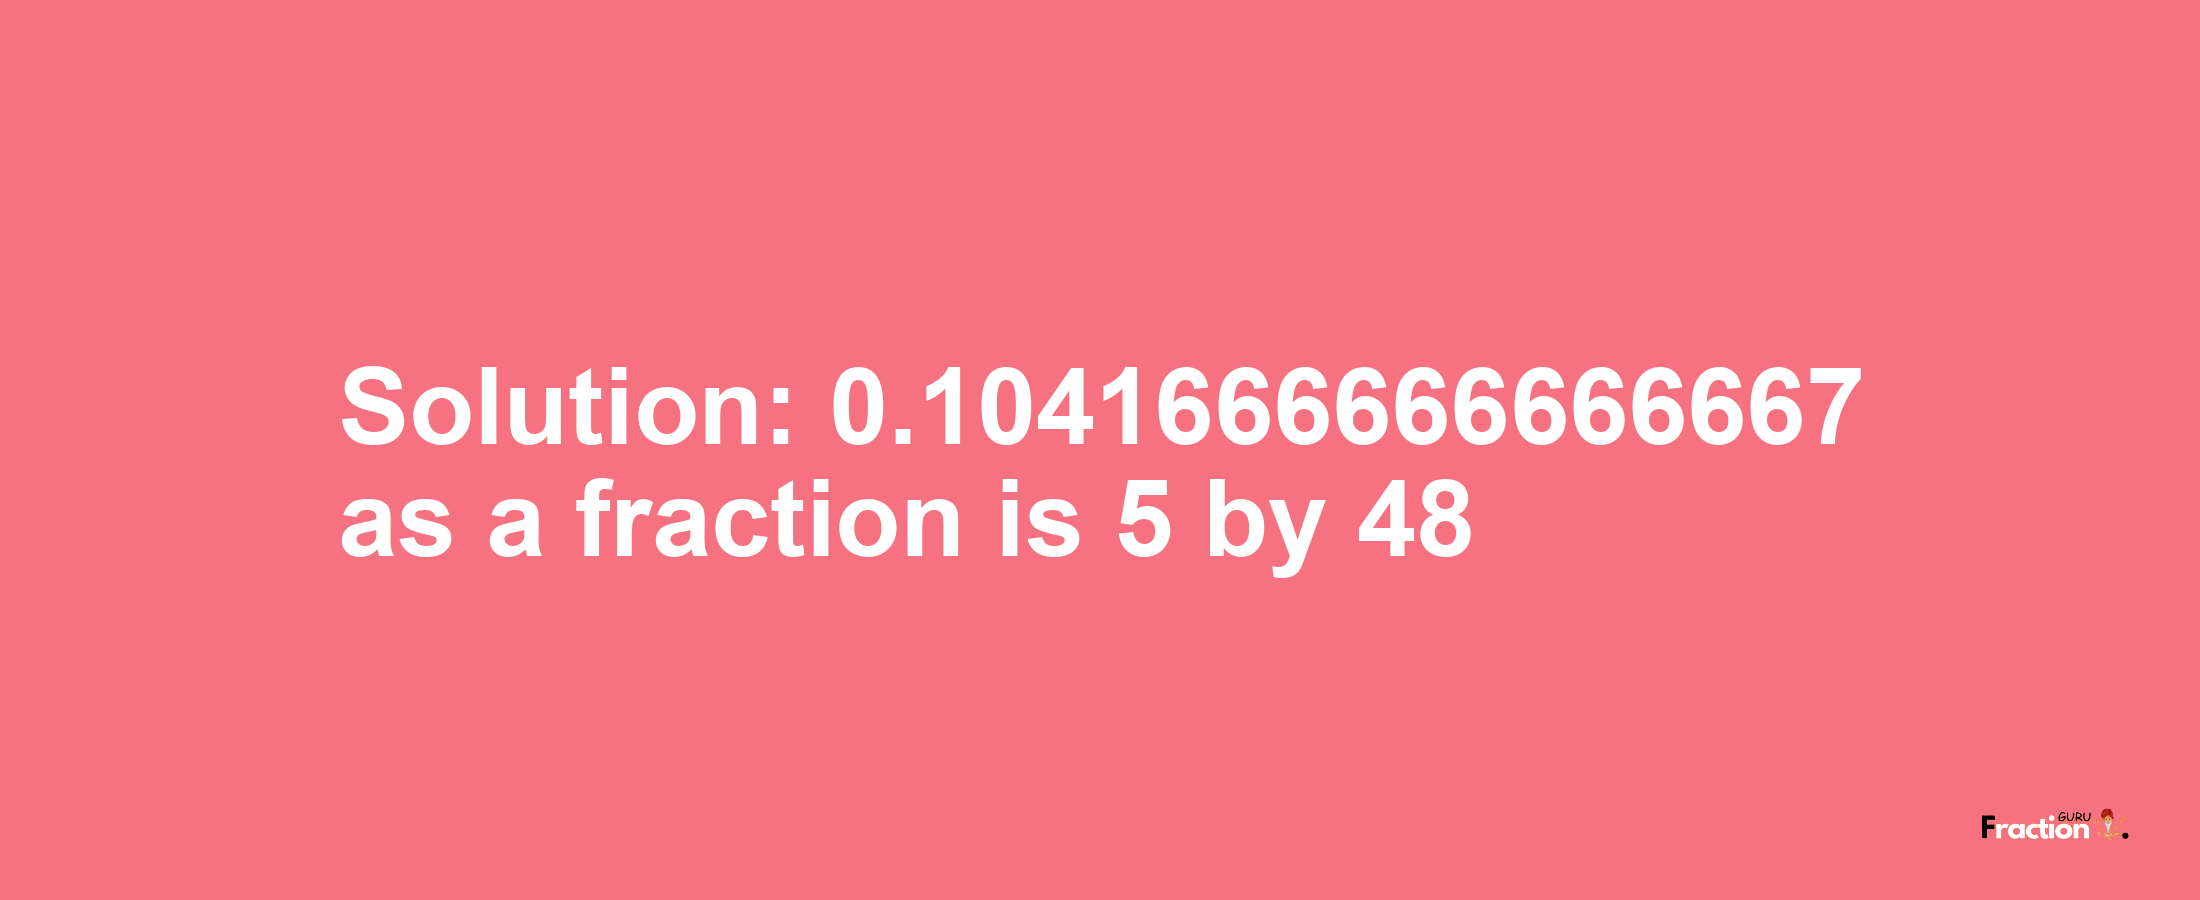 Solution:0.1041666666666667 as a fraction is 5/48